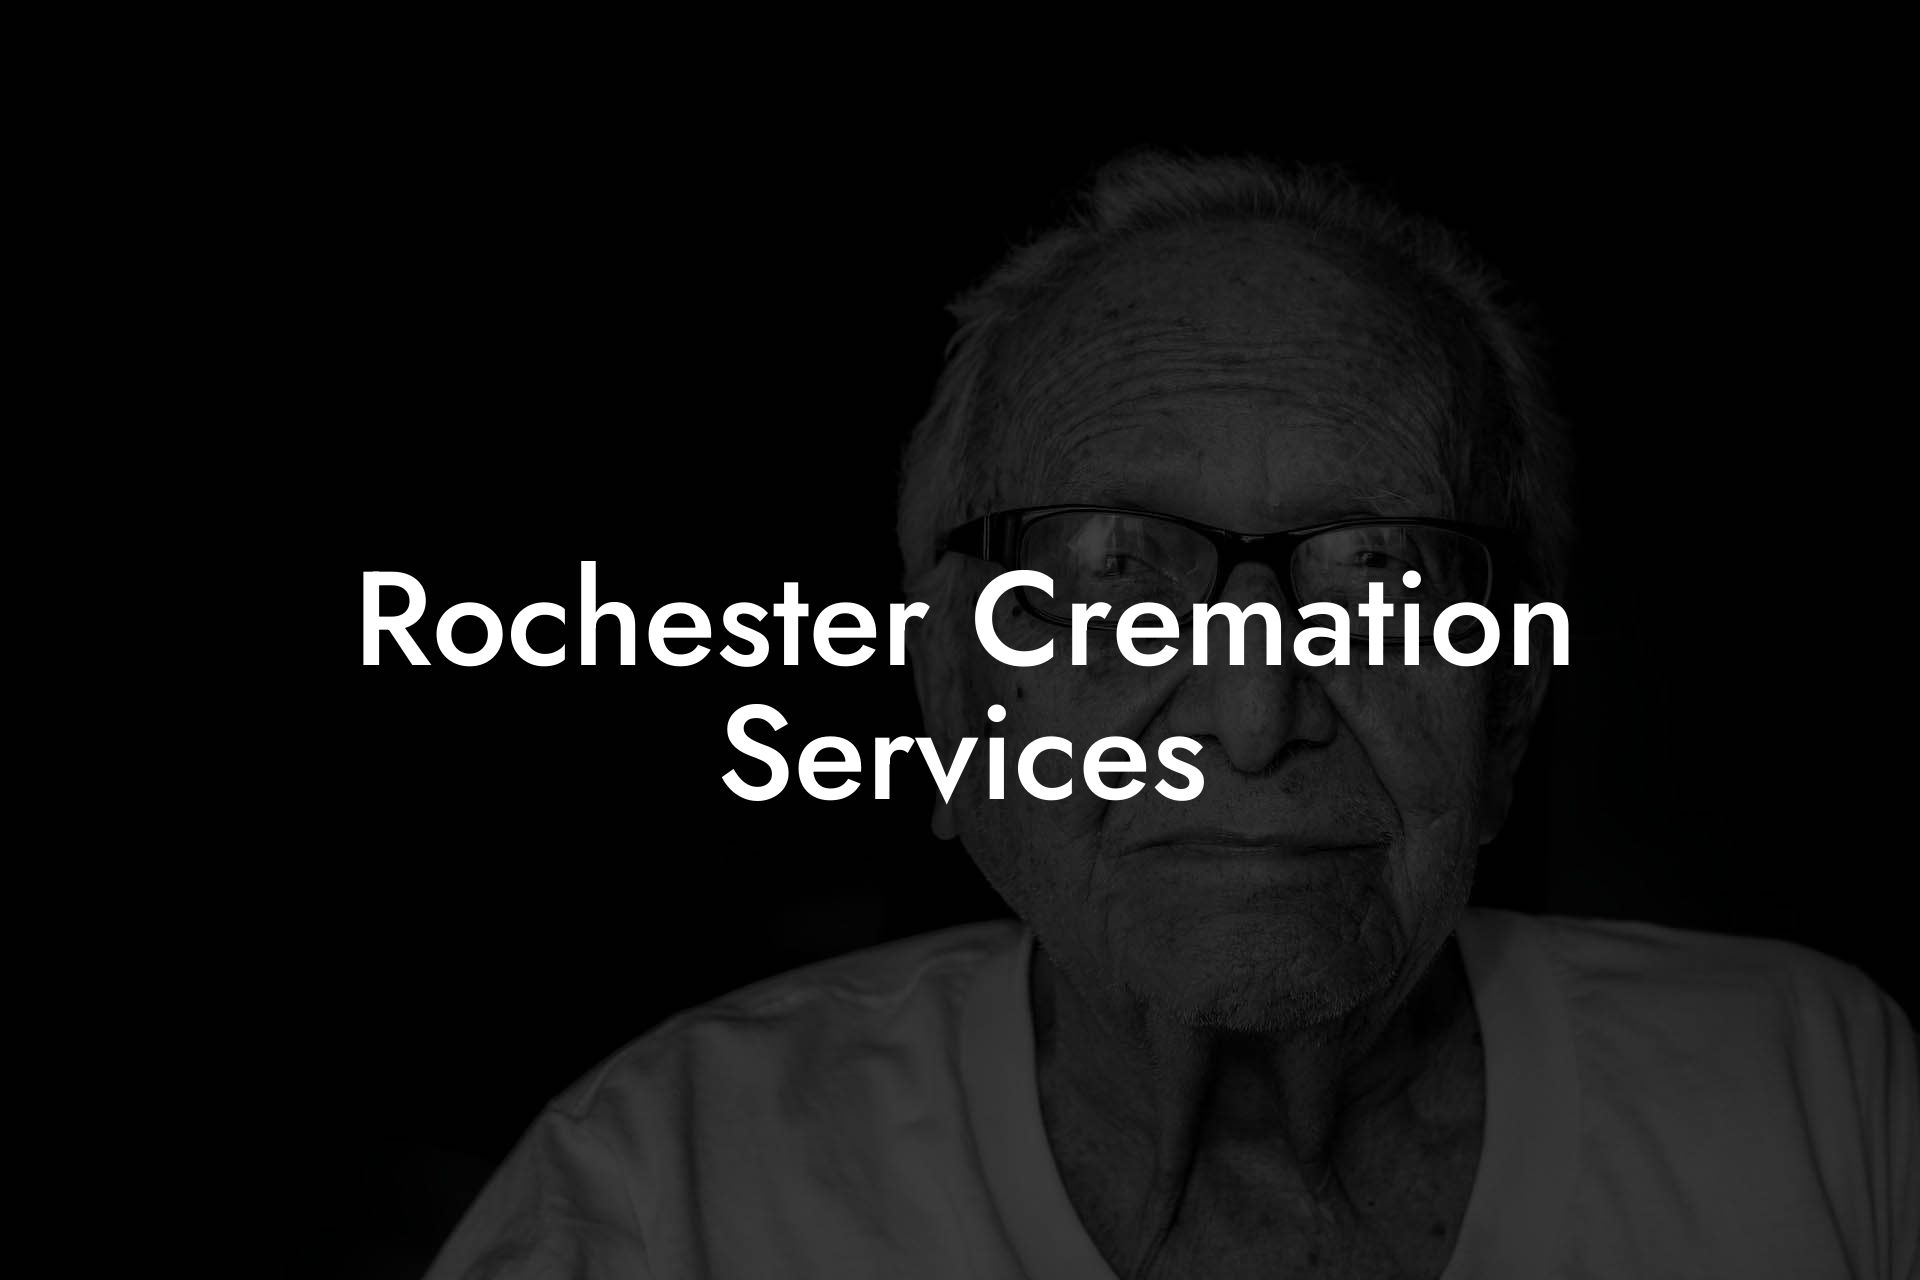 Rochester Cremation Services